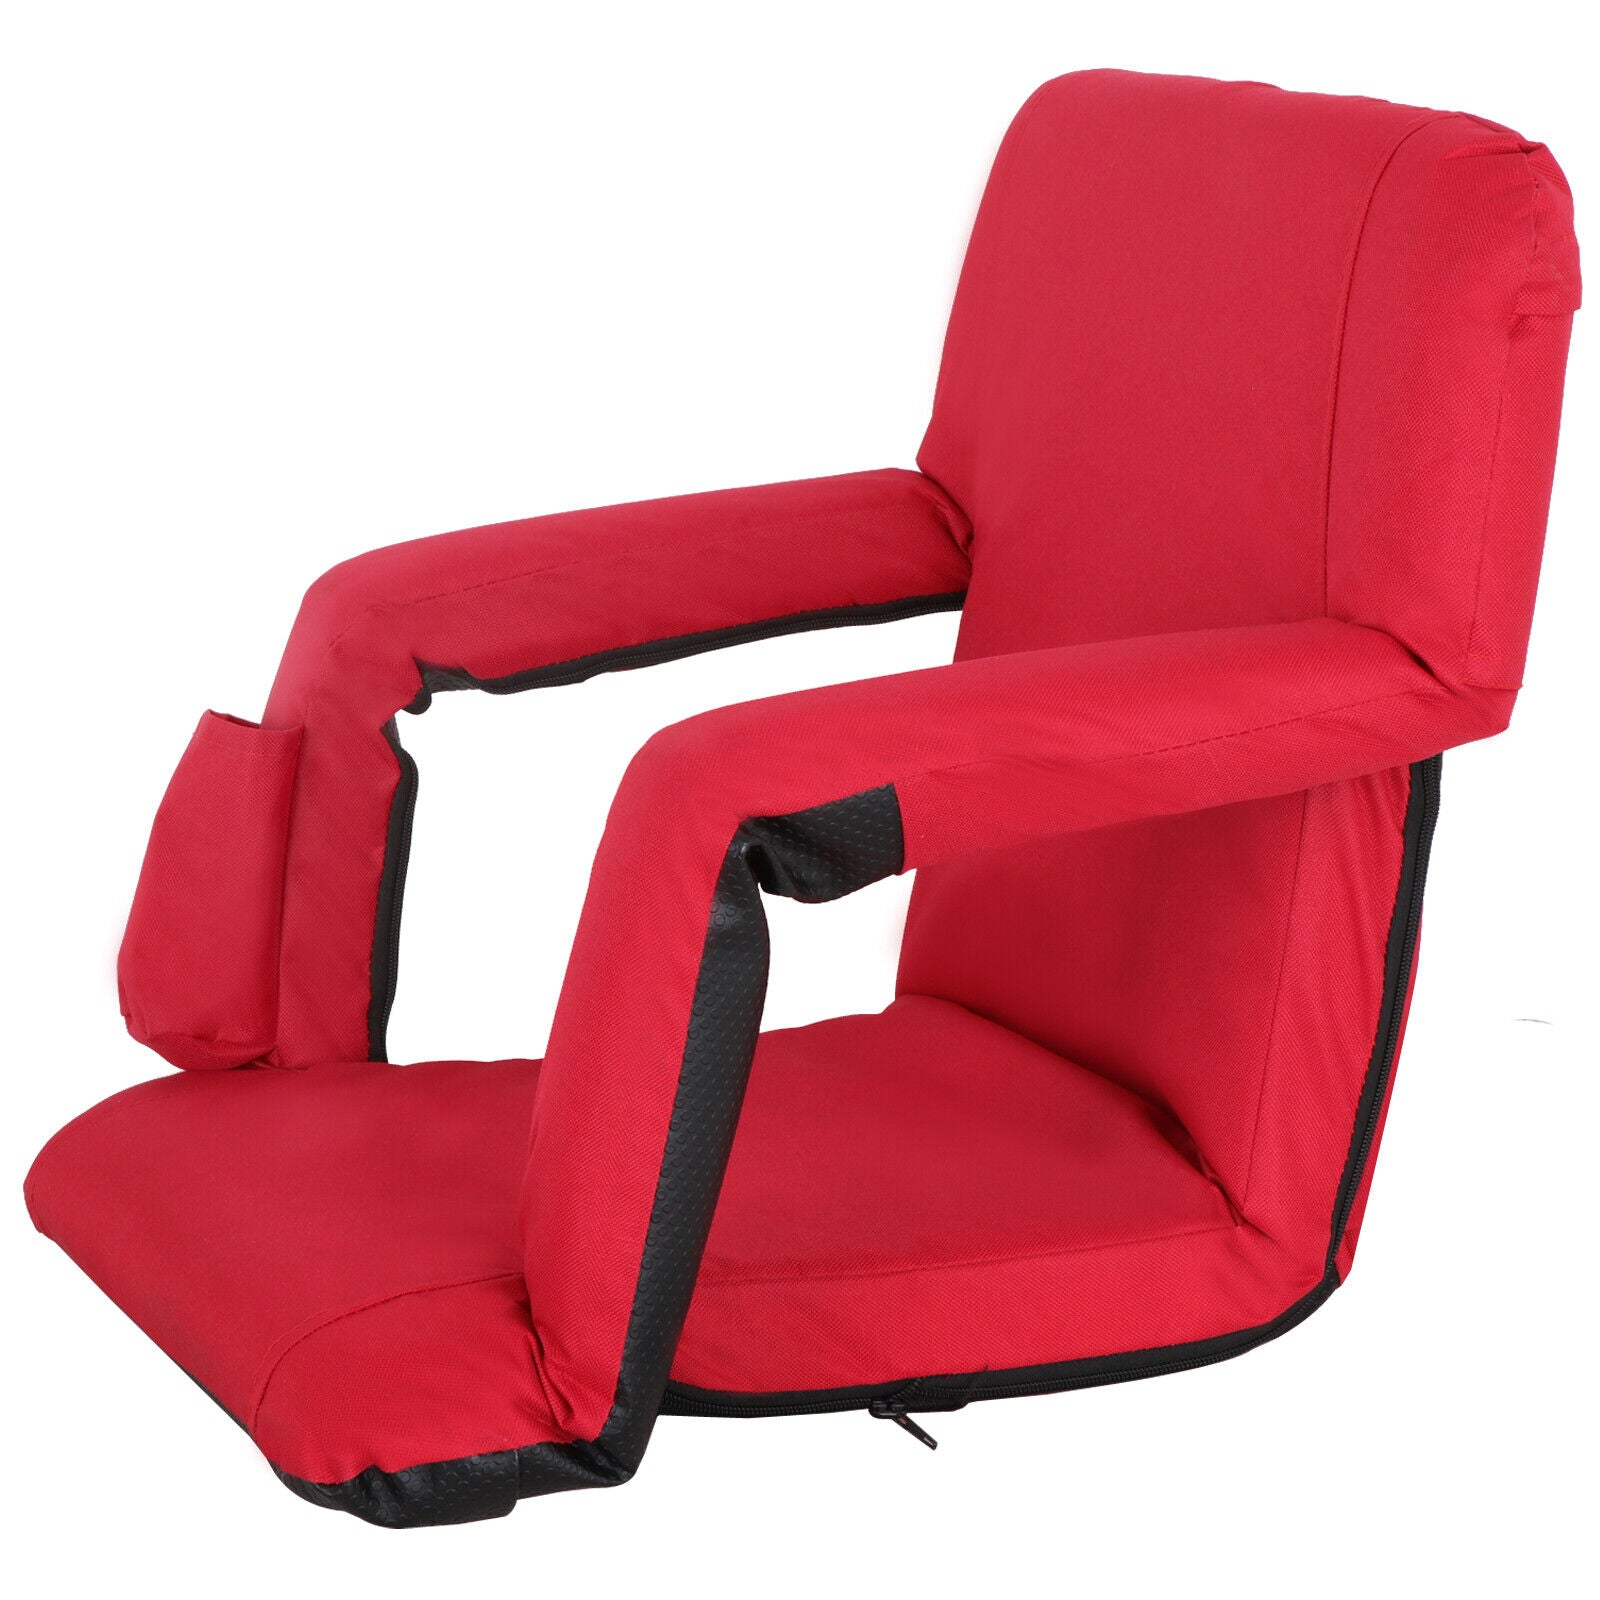 Red Wide Stadium Seats Chairs for Bleachers or Benches - 5 Reclining Positions